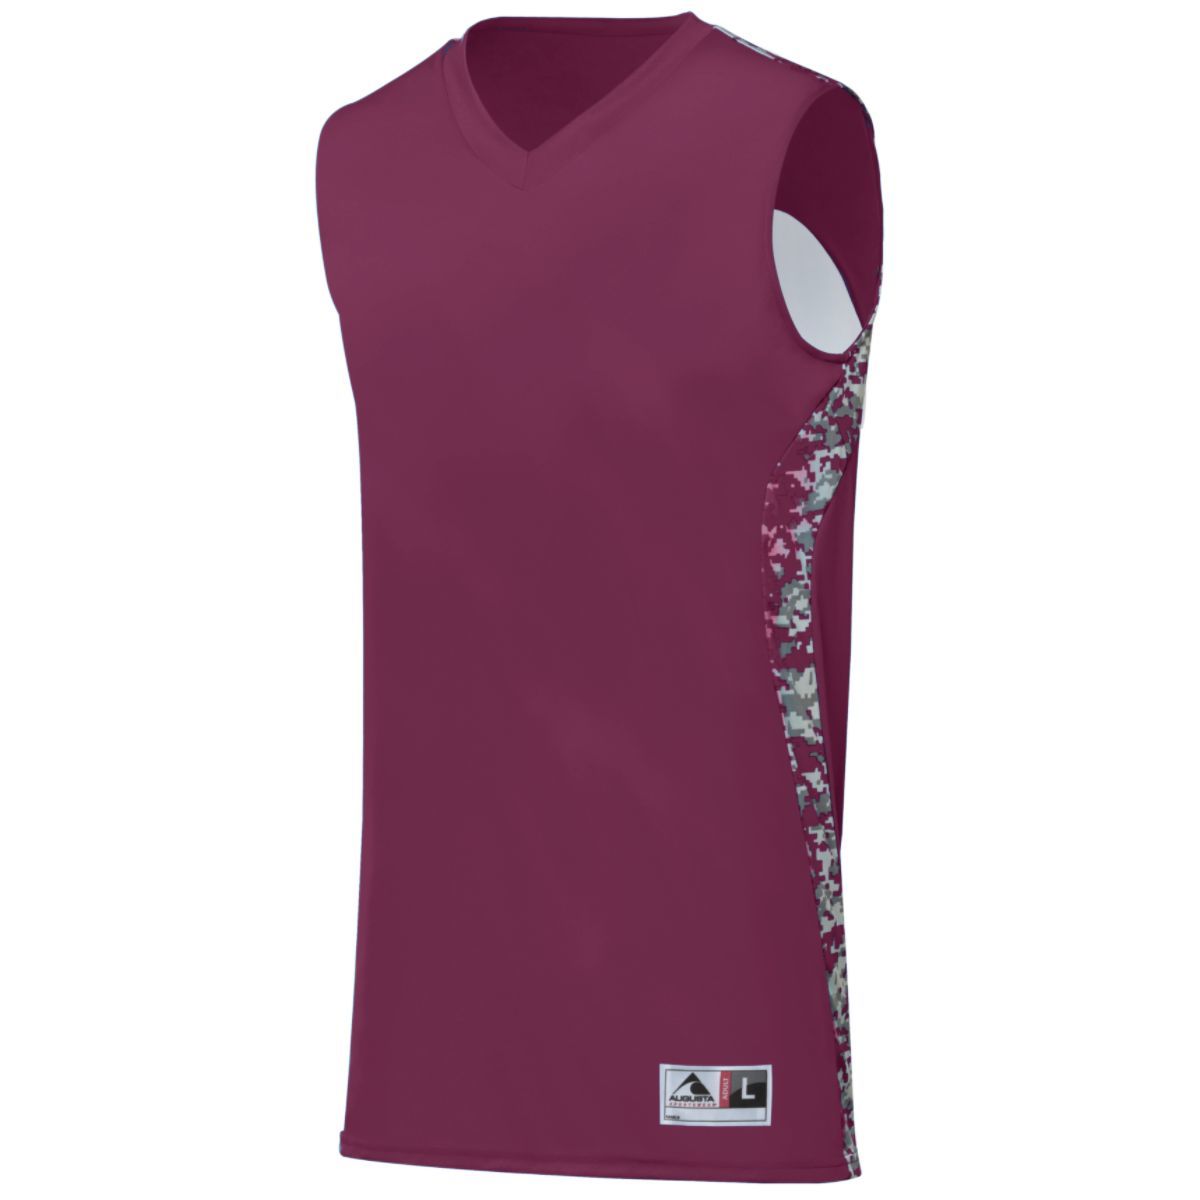 Augusta Sportswear Hook Shot Reversible Jersey in Maroon/Maroon Digi  -Part of the Adult, Adult-Jersey, Augusta-Products, Basketball, Shirts, All-Sports, All-Sports-1 product lines at KanaleyCreations.com